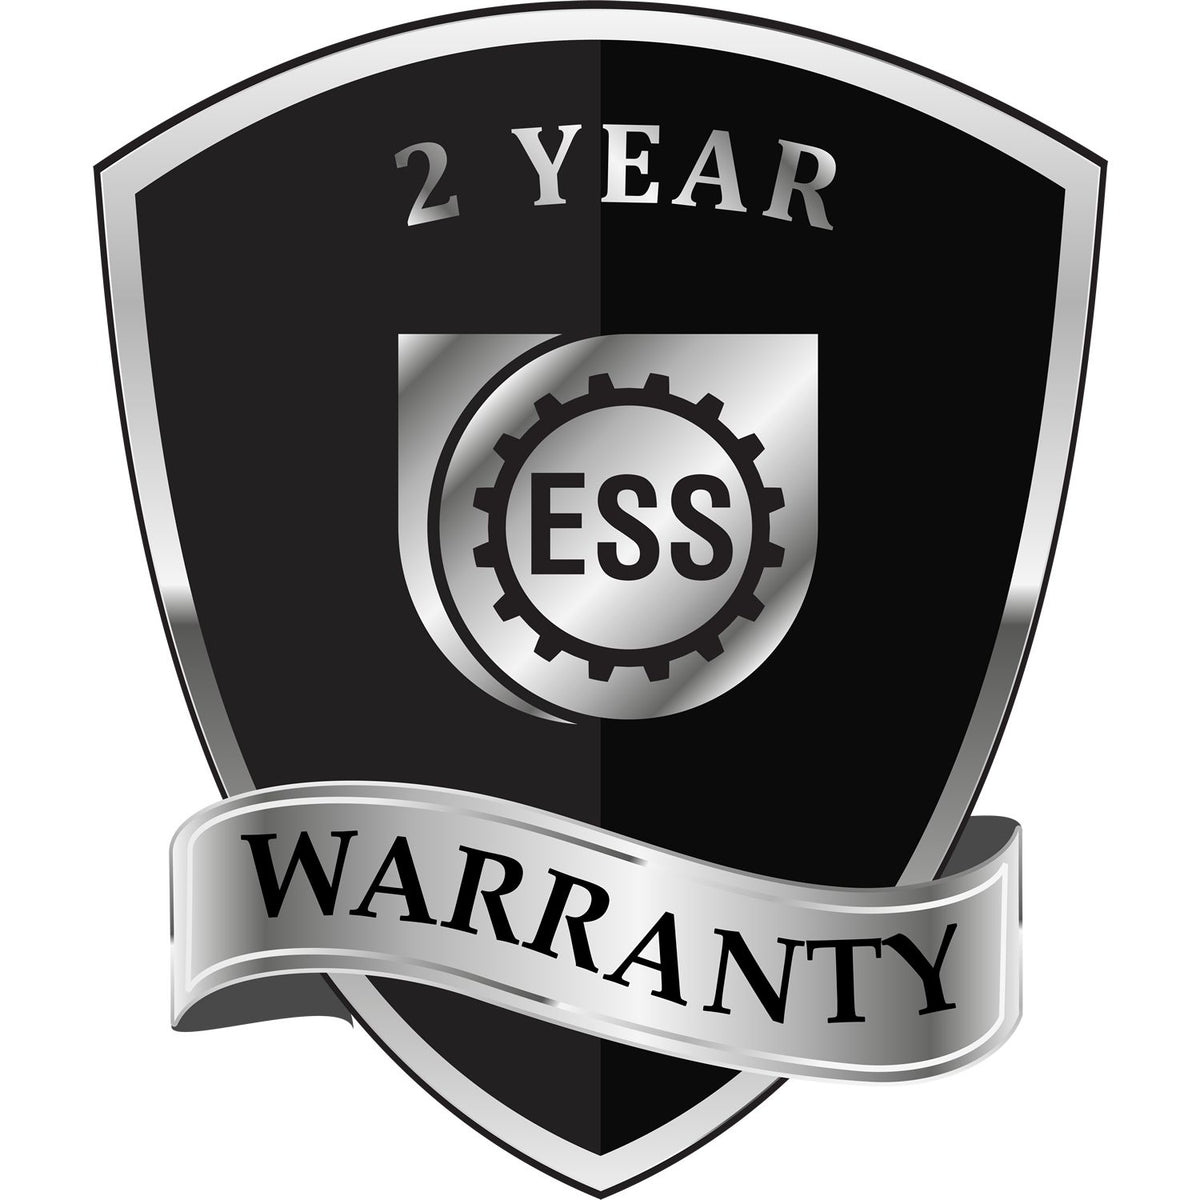 A badge or emblem showing a warranty icon for the Heavy Duty Cast Iron Washington Architect Embosser